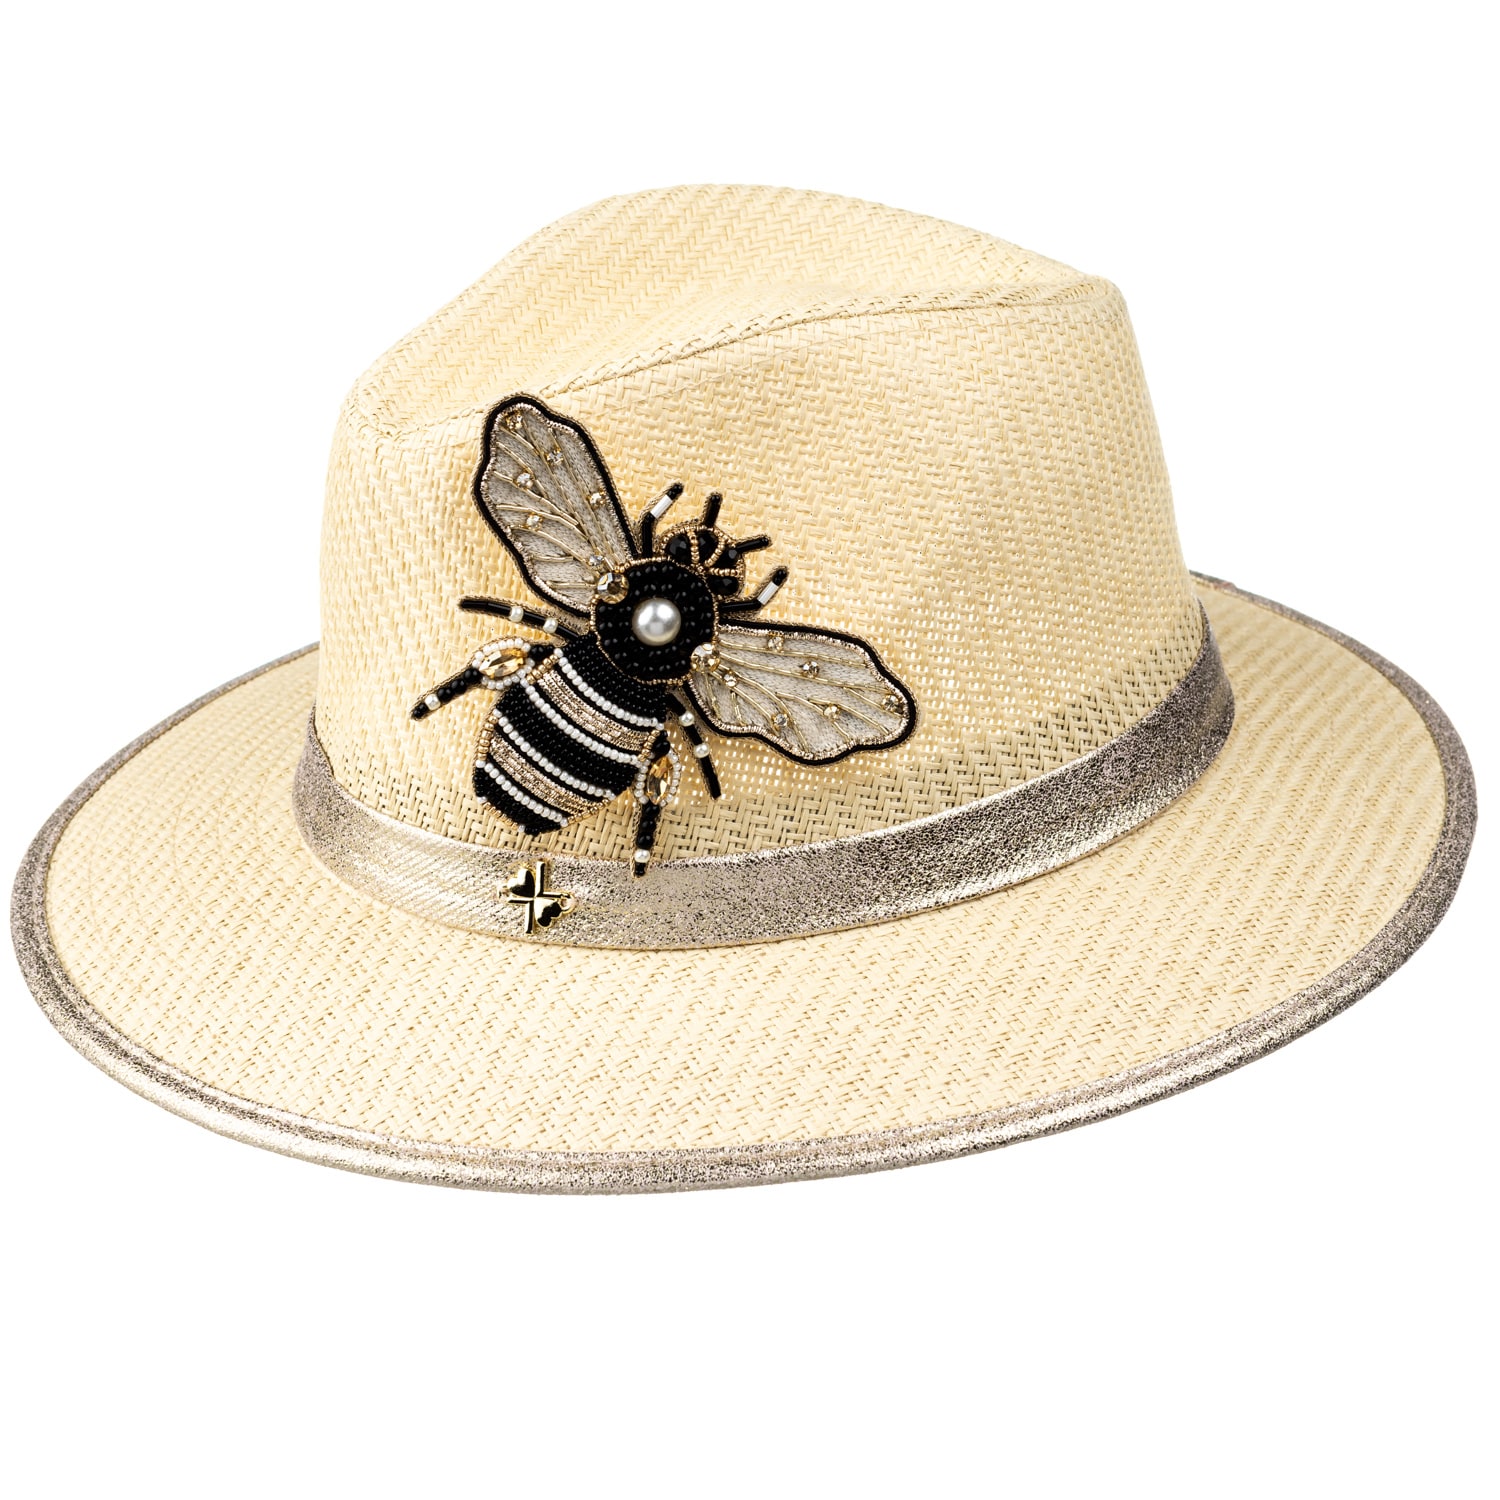 Women’s Neutrals Straw Woven Hat With Embellished Cream & Gold Bee Brooch - Cream One Size Laines London